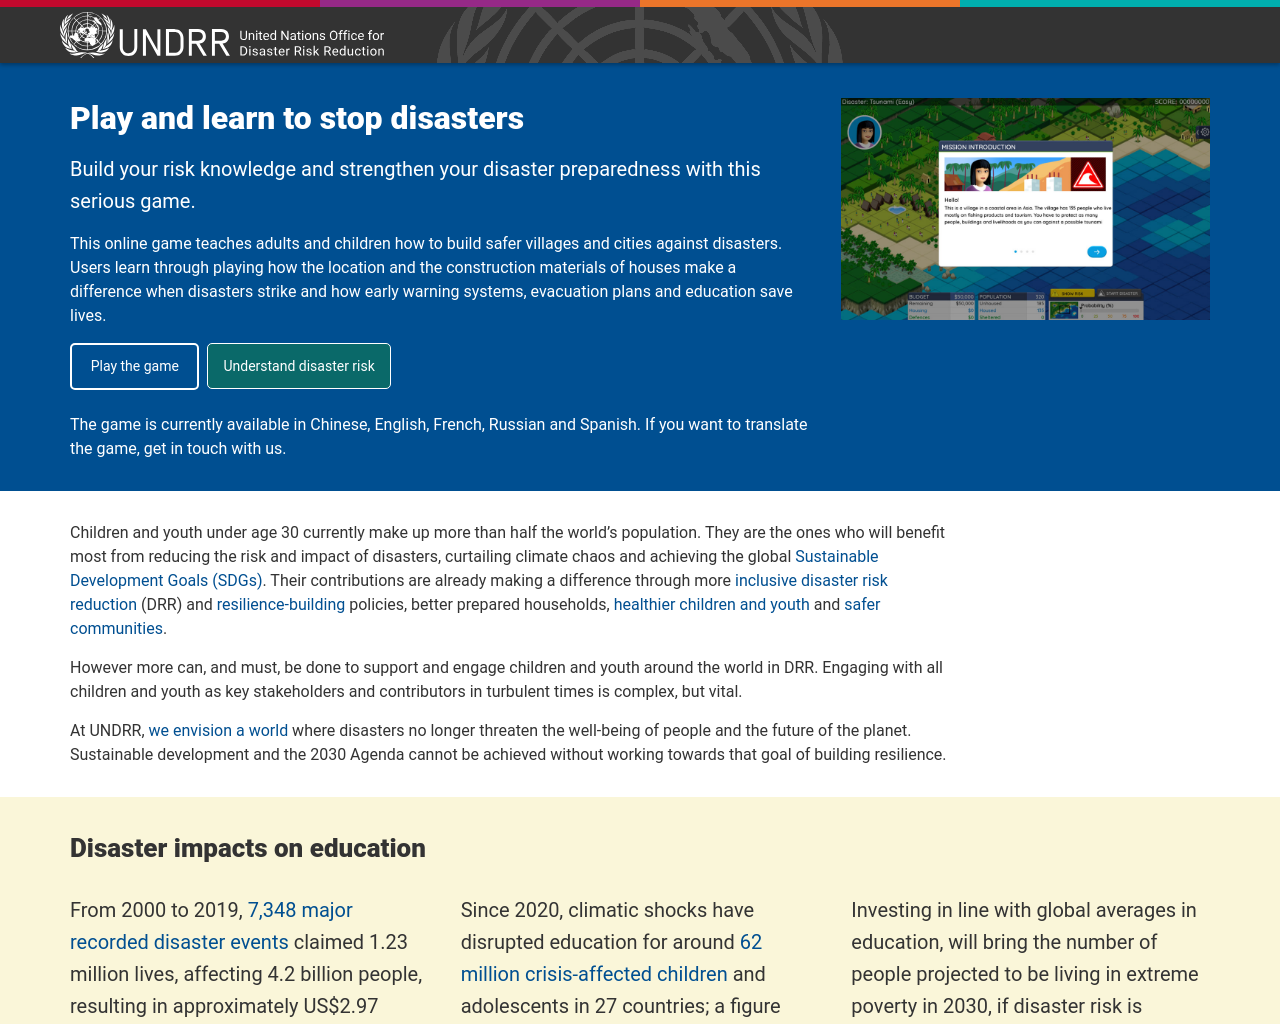 stopdisastersgame.org